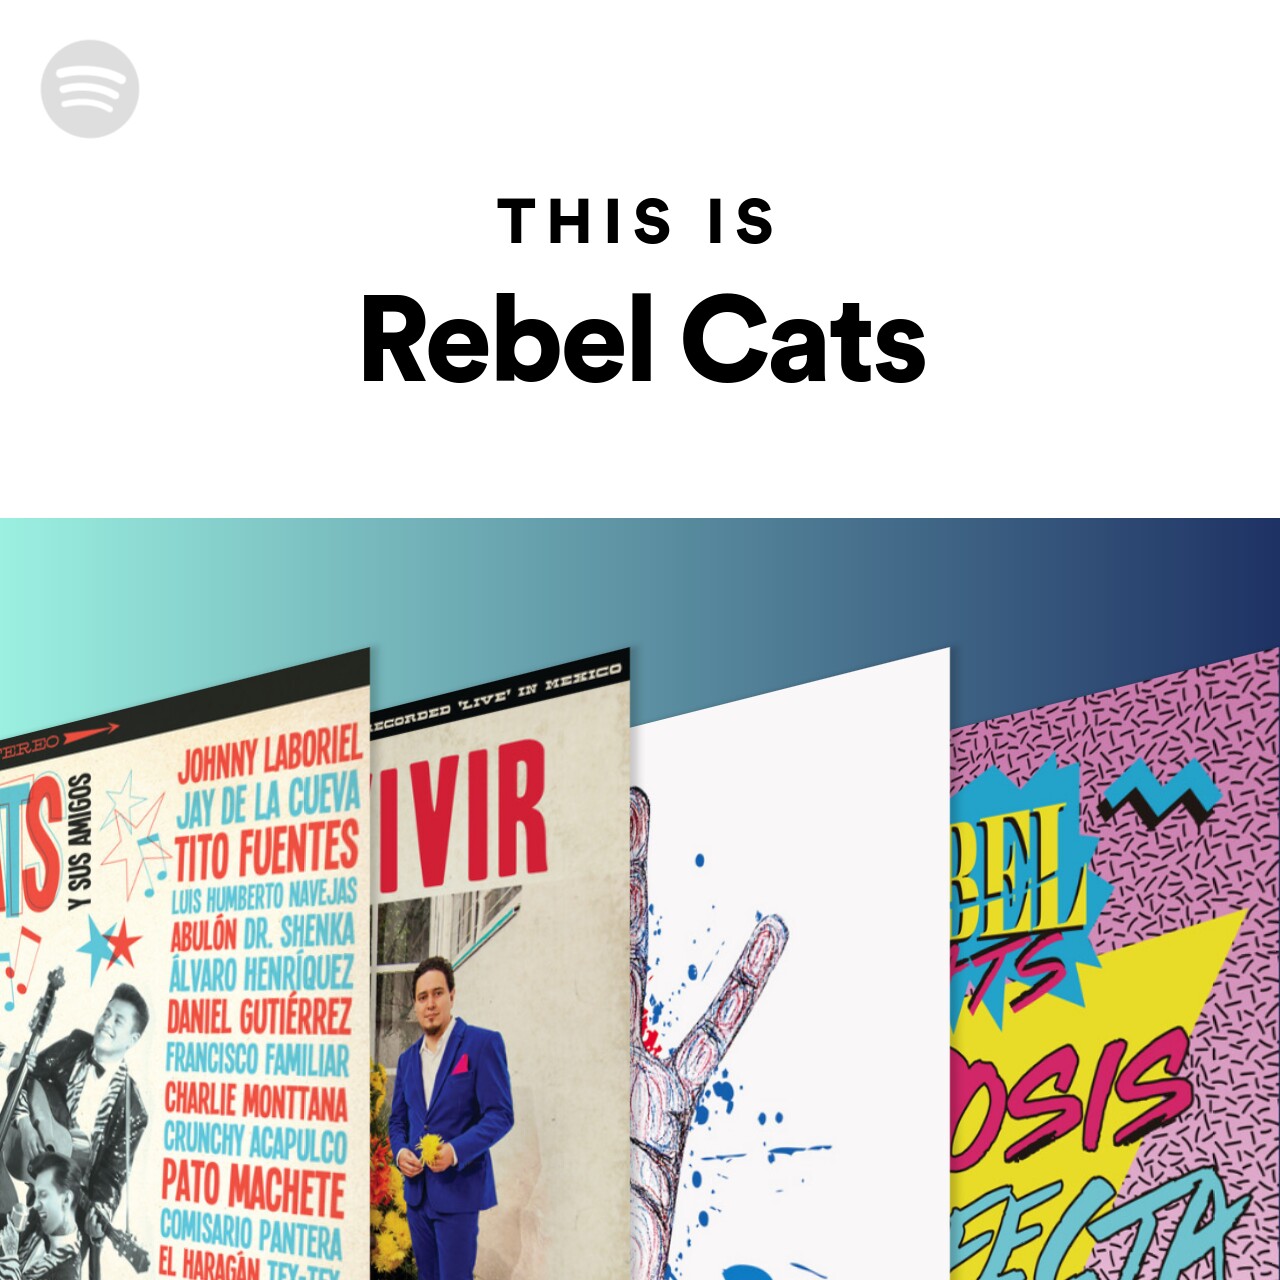 This Is Rebel Cats